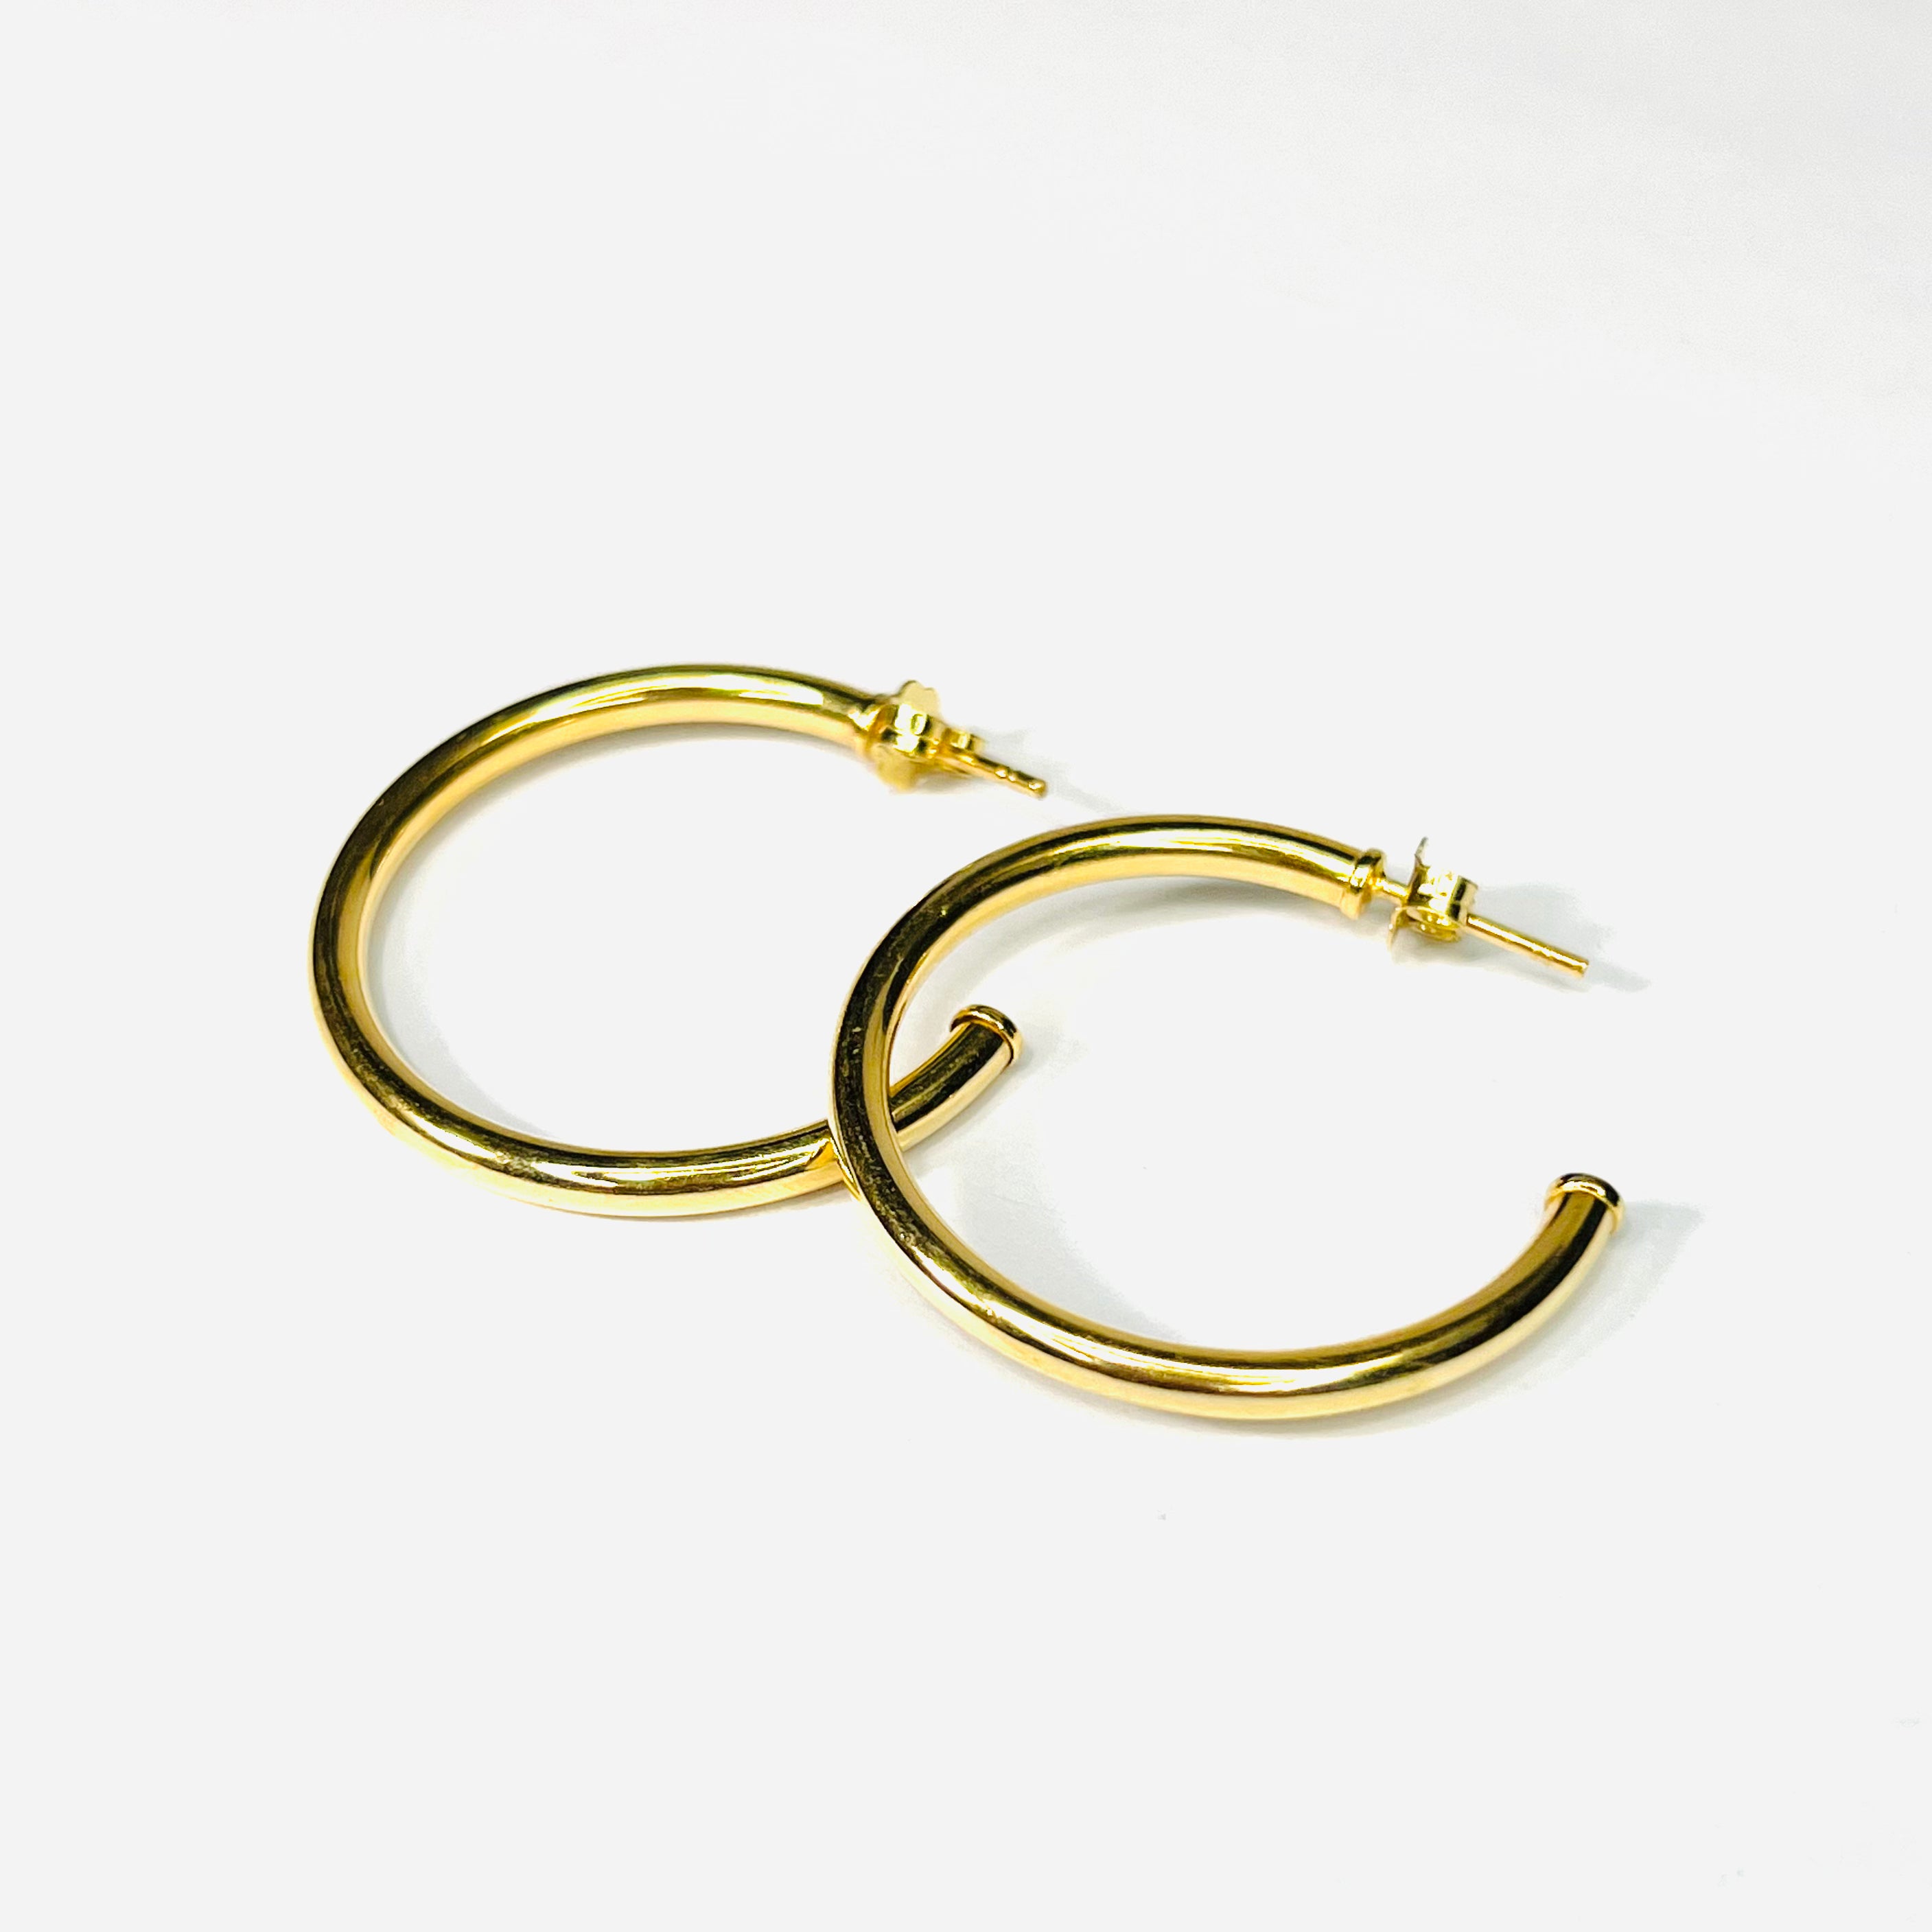 Solid 14k Yellow Gold Smooth Half Earring Hoop 1.4" 2.86g